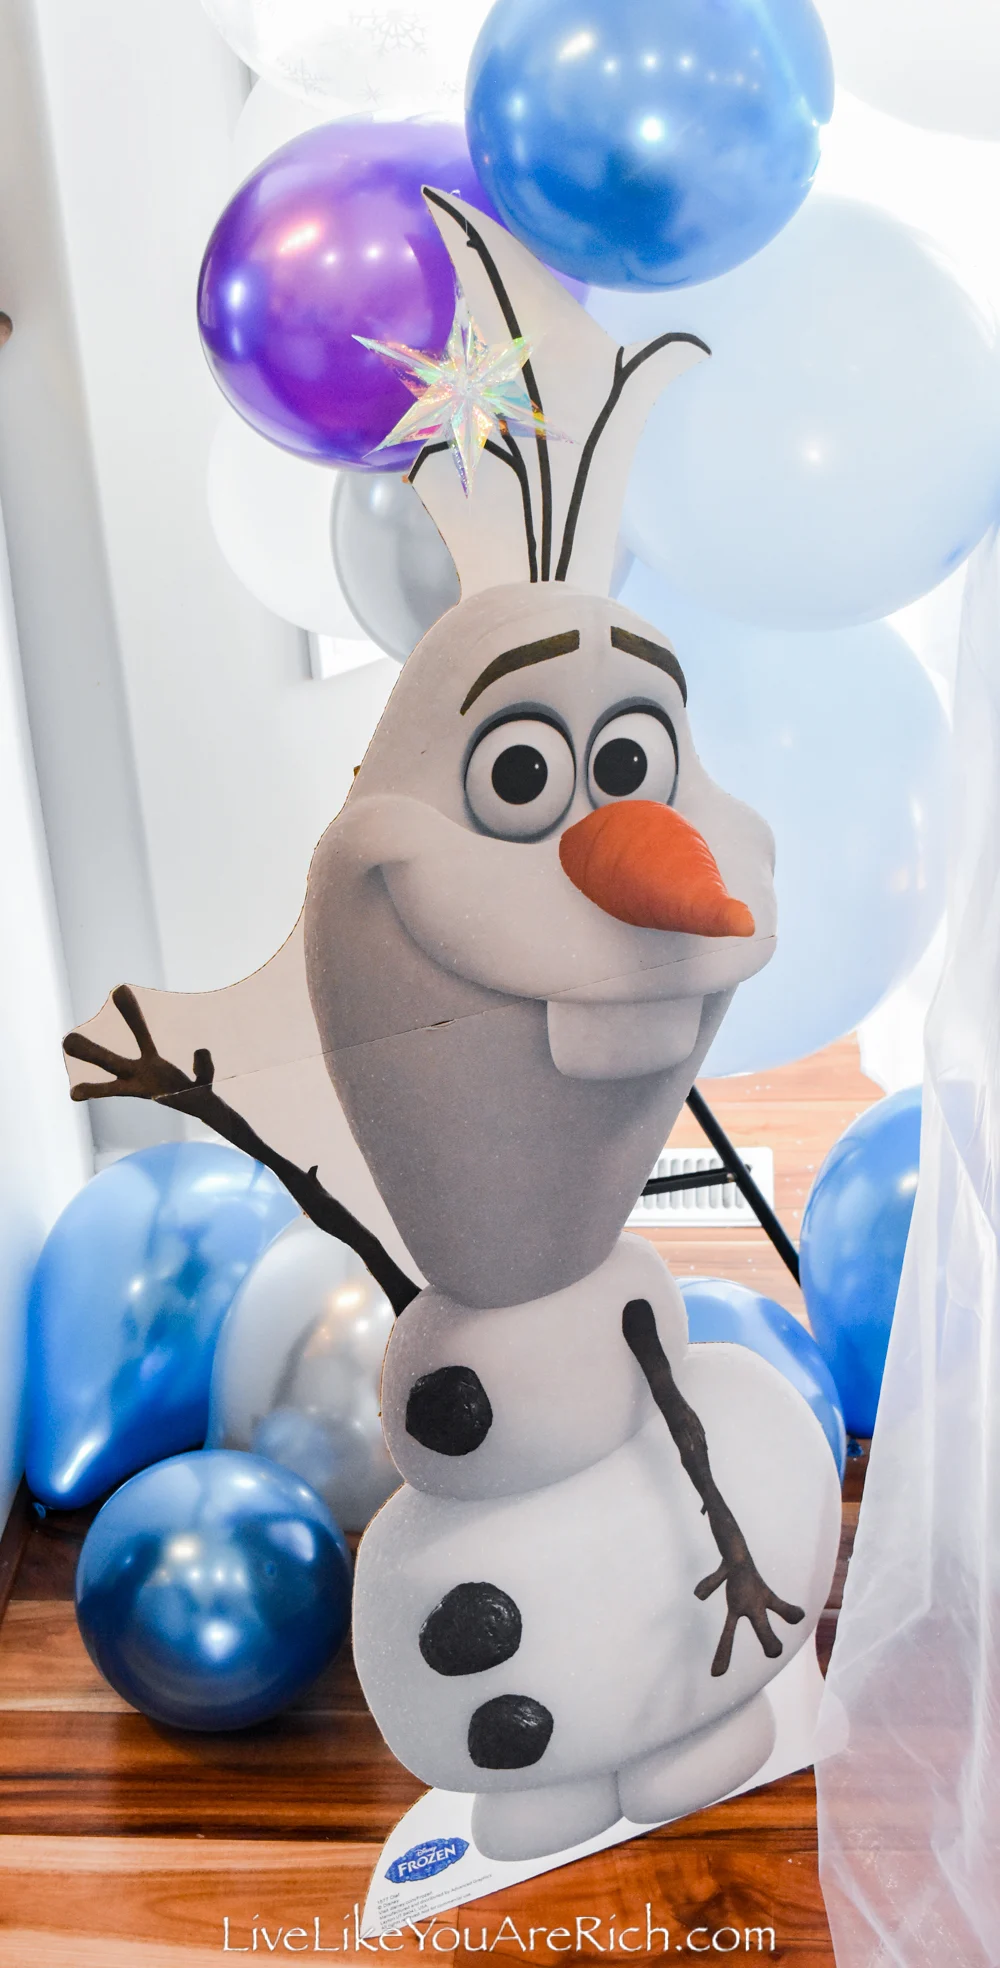 Frozen Birthday Party for a Four-Year-Old